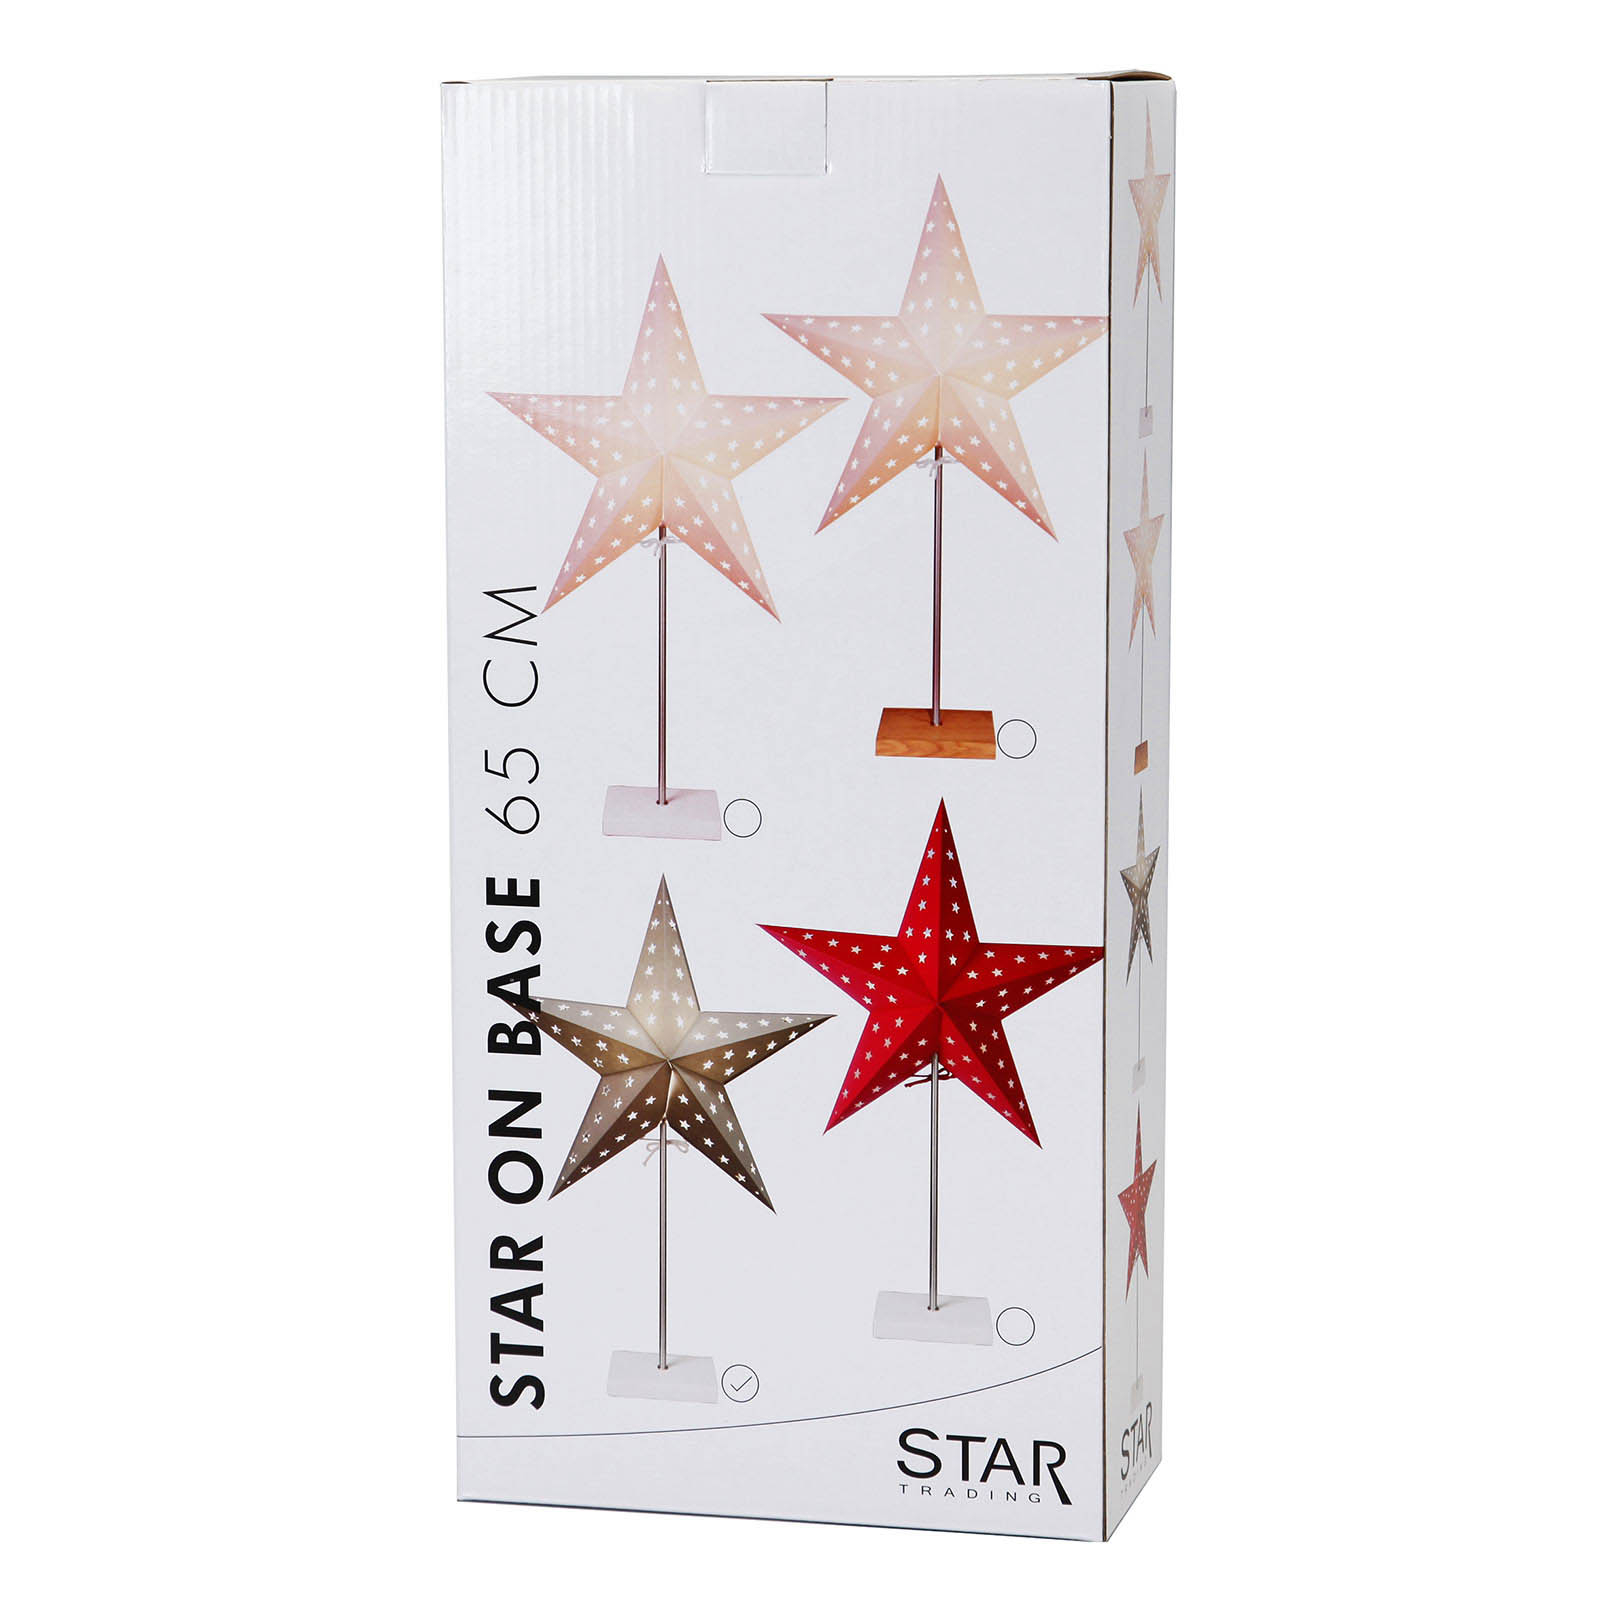 Leo standing star with star pattern, white/oak